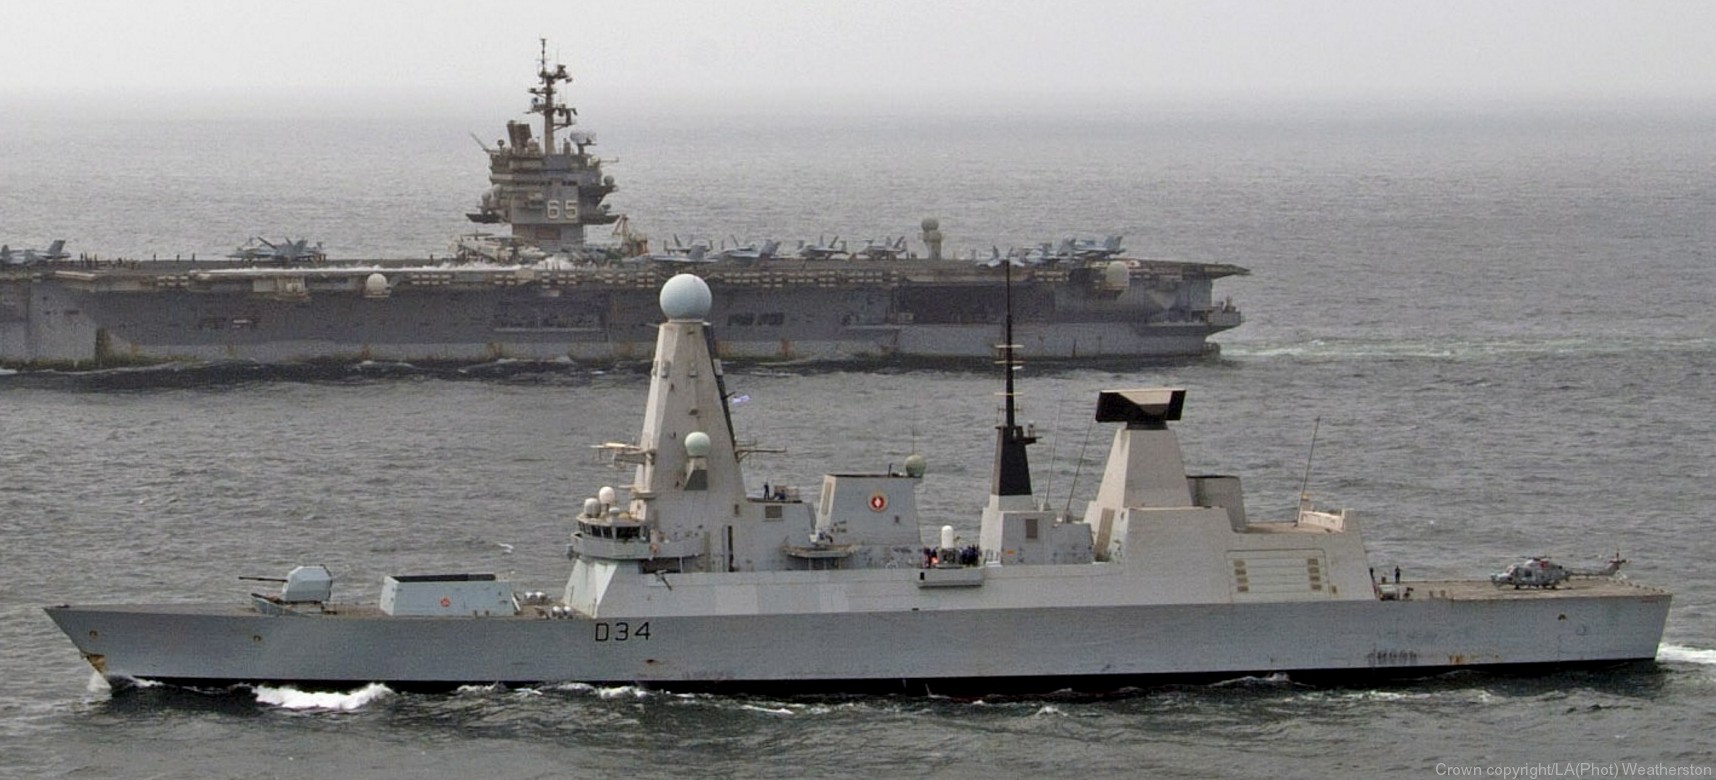 hms diamond d-34 type 45 daring class guided missile destroyer ddg royal navy sea viper paams 28